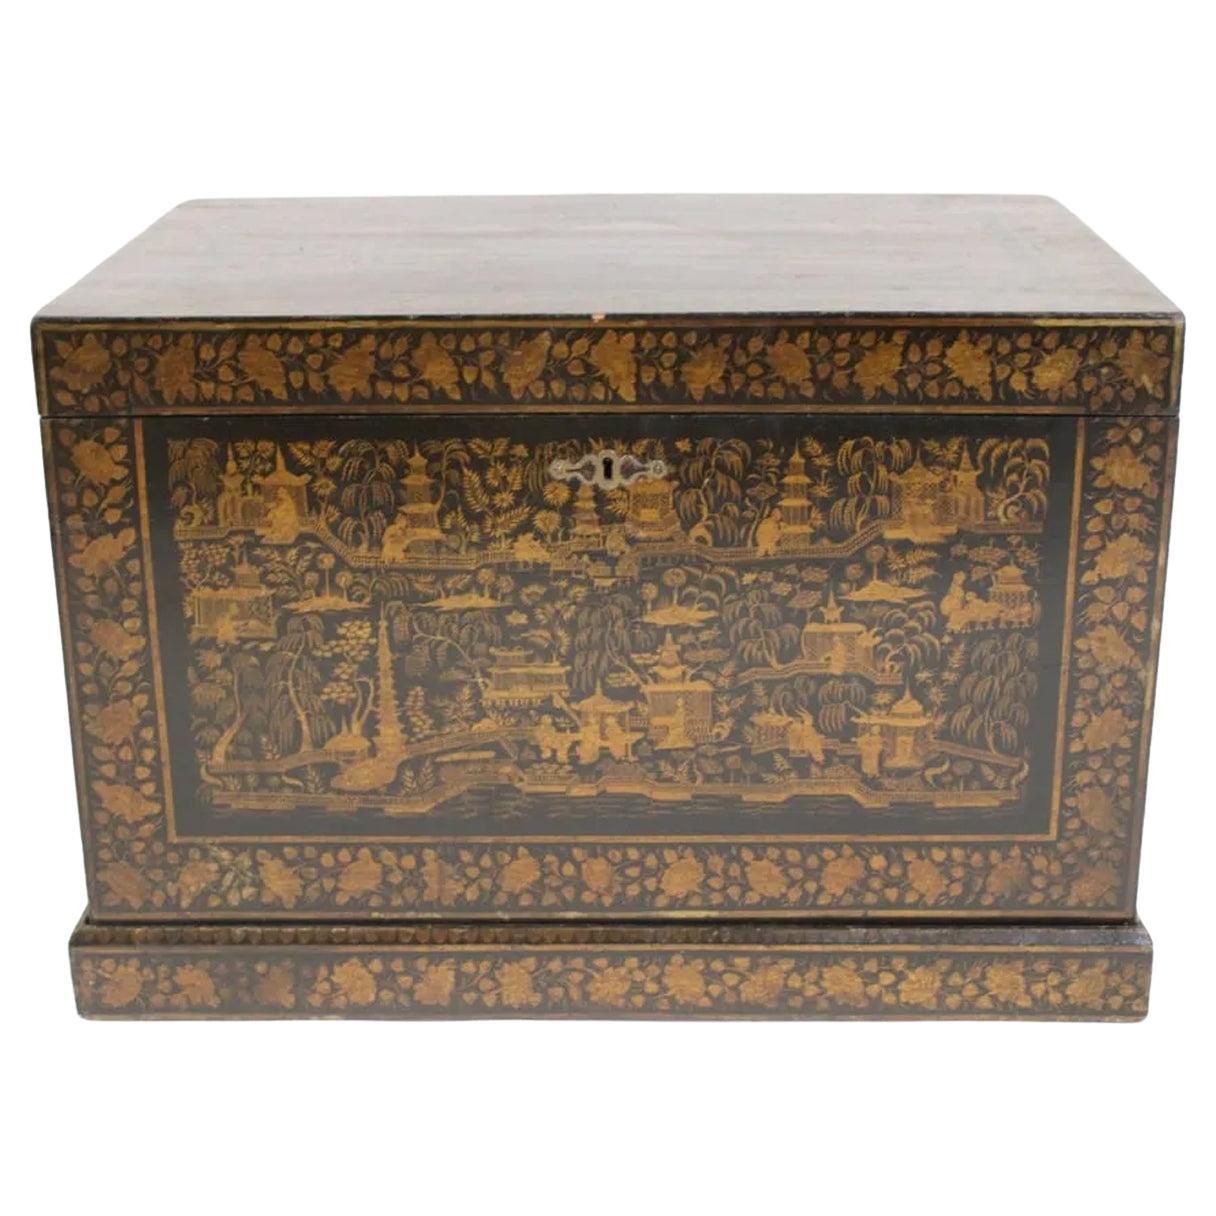 Chinese Export Gold Decorated Black Lacquer Storage Box on Plinth Base